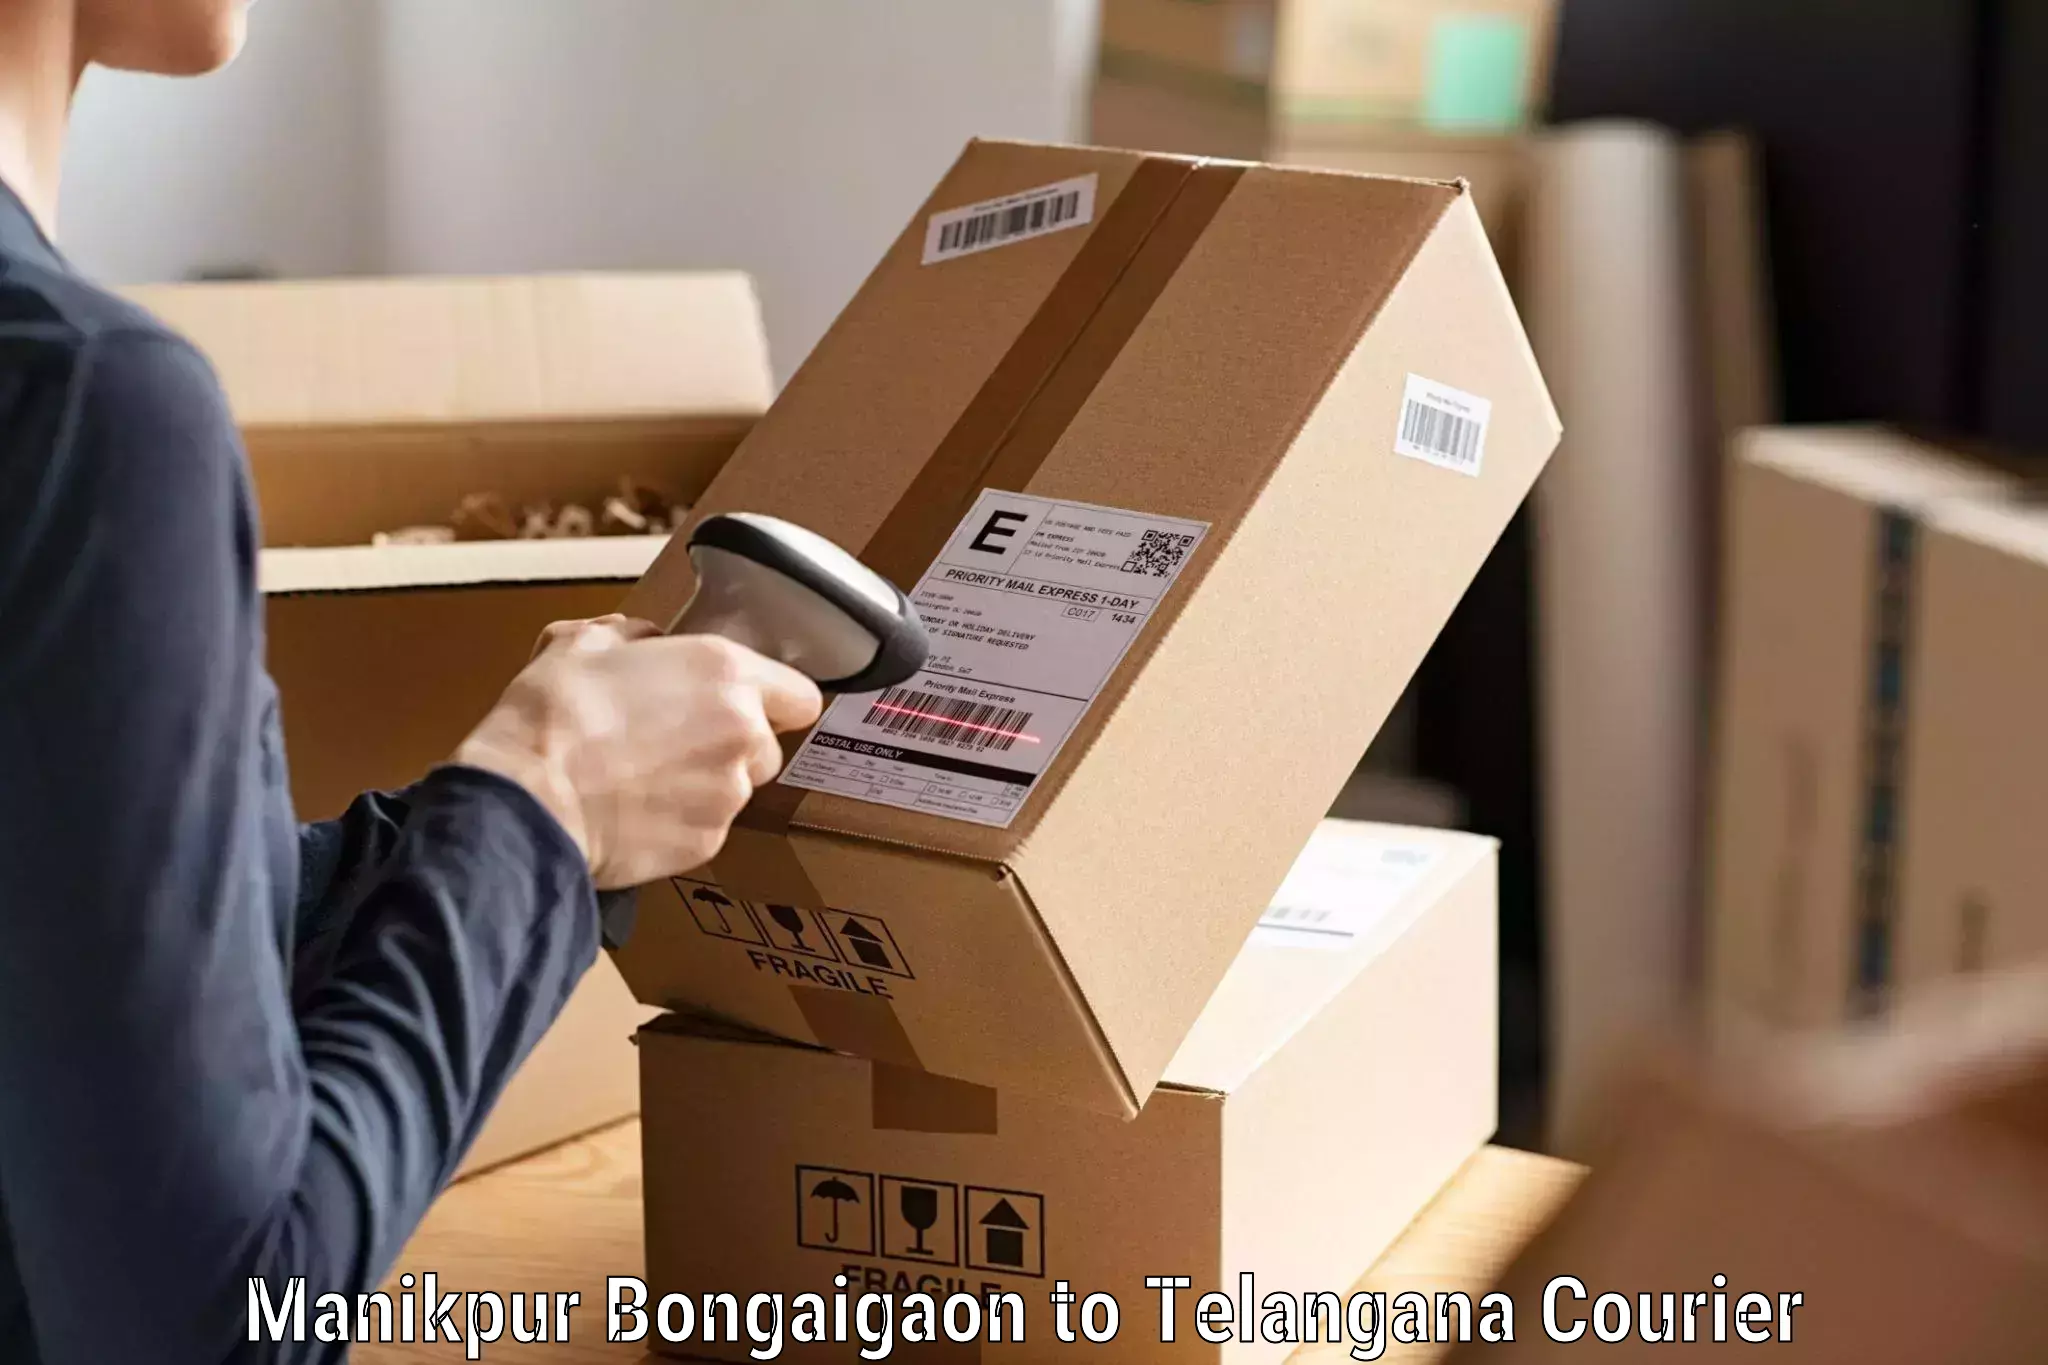 Subscription-based courier Manikpur Bongaigaon to Medchal